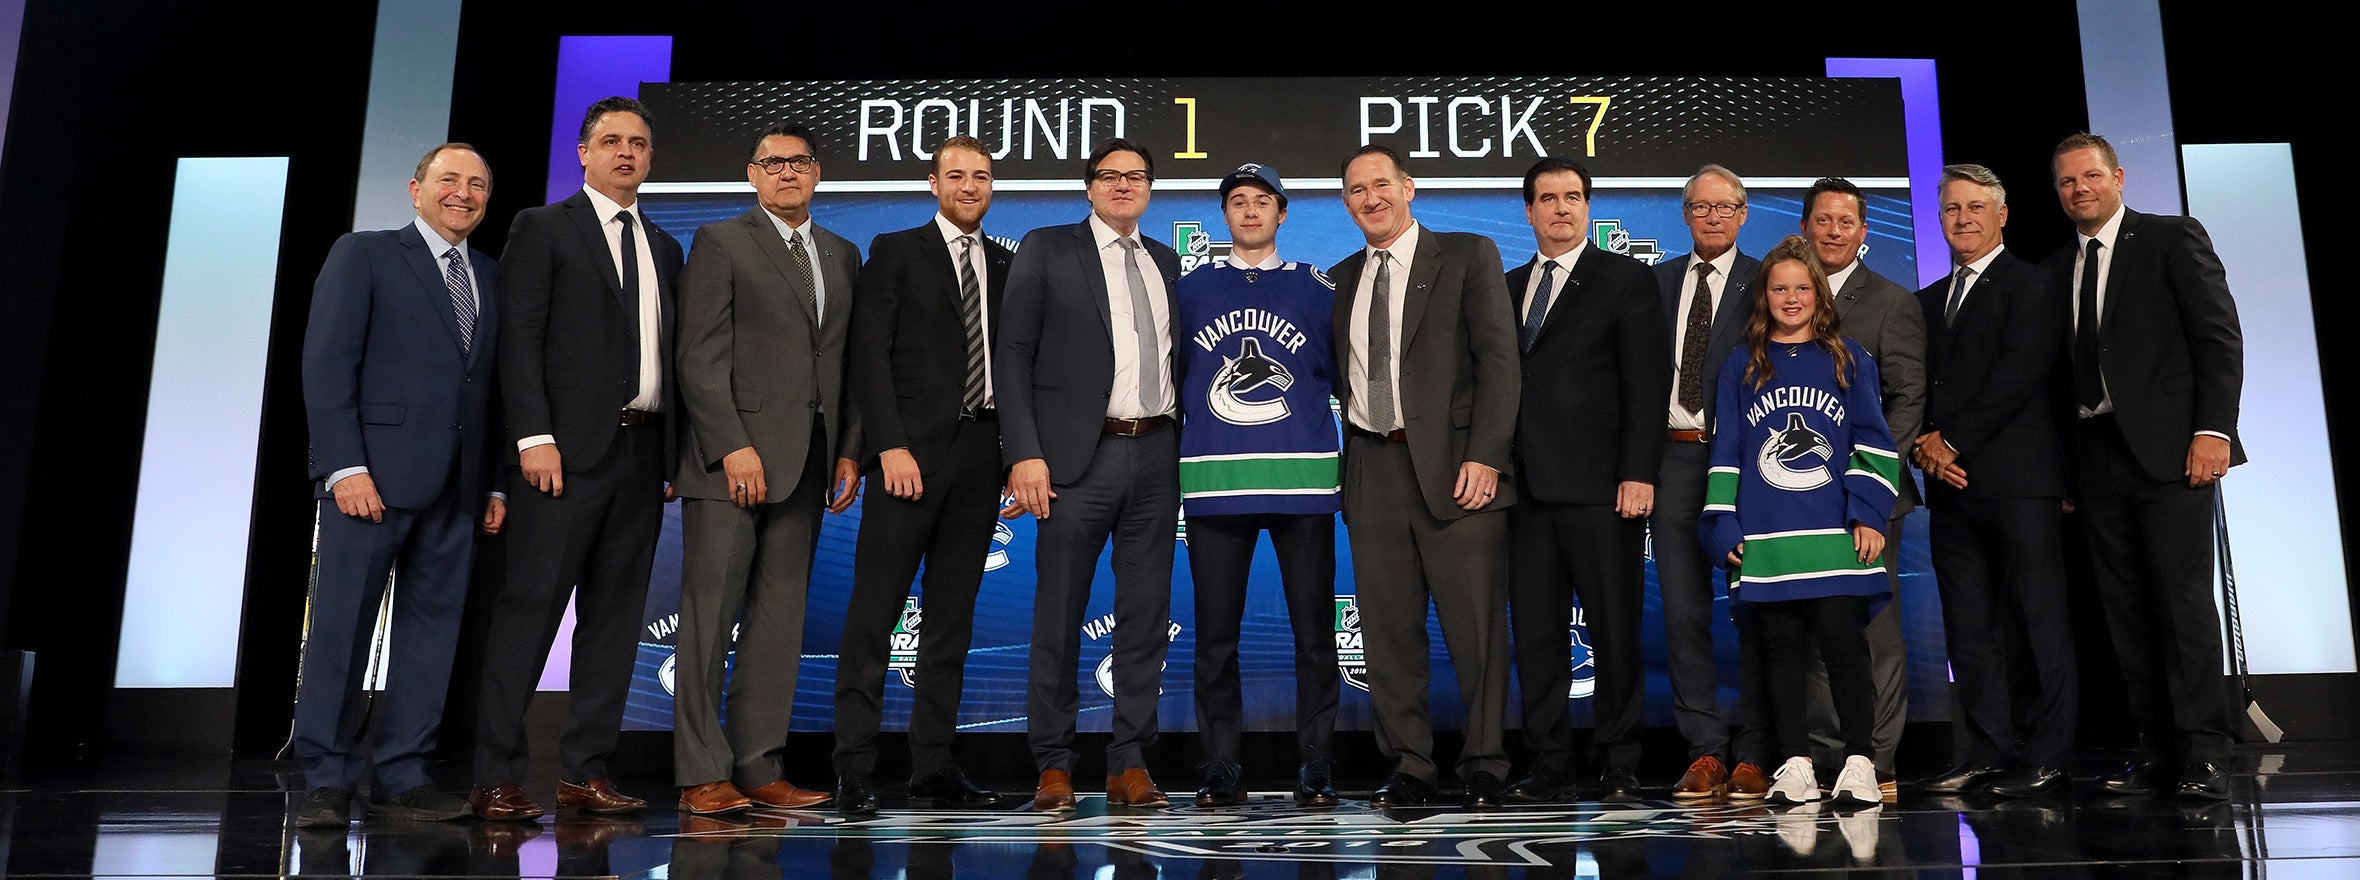 GET TO KNOW THE 2018 CANUCKS DRAFT PICKS